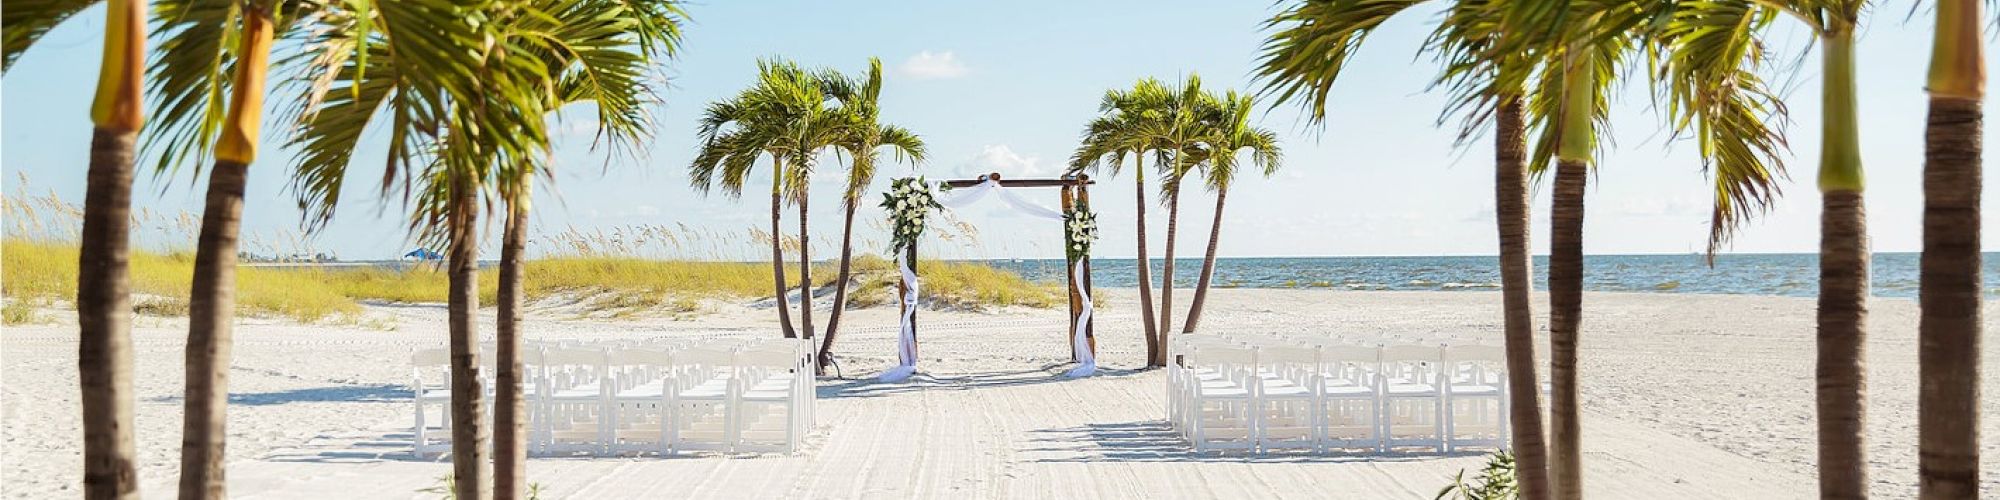 A beach setup for a wedding ceremony with white chairs, palm trees lining the walkway, and an arch adorned with flowers near the shoreline.